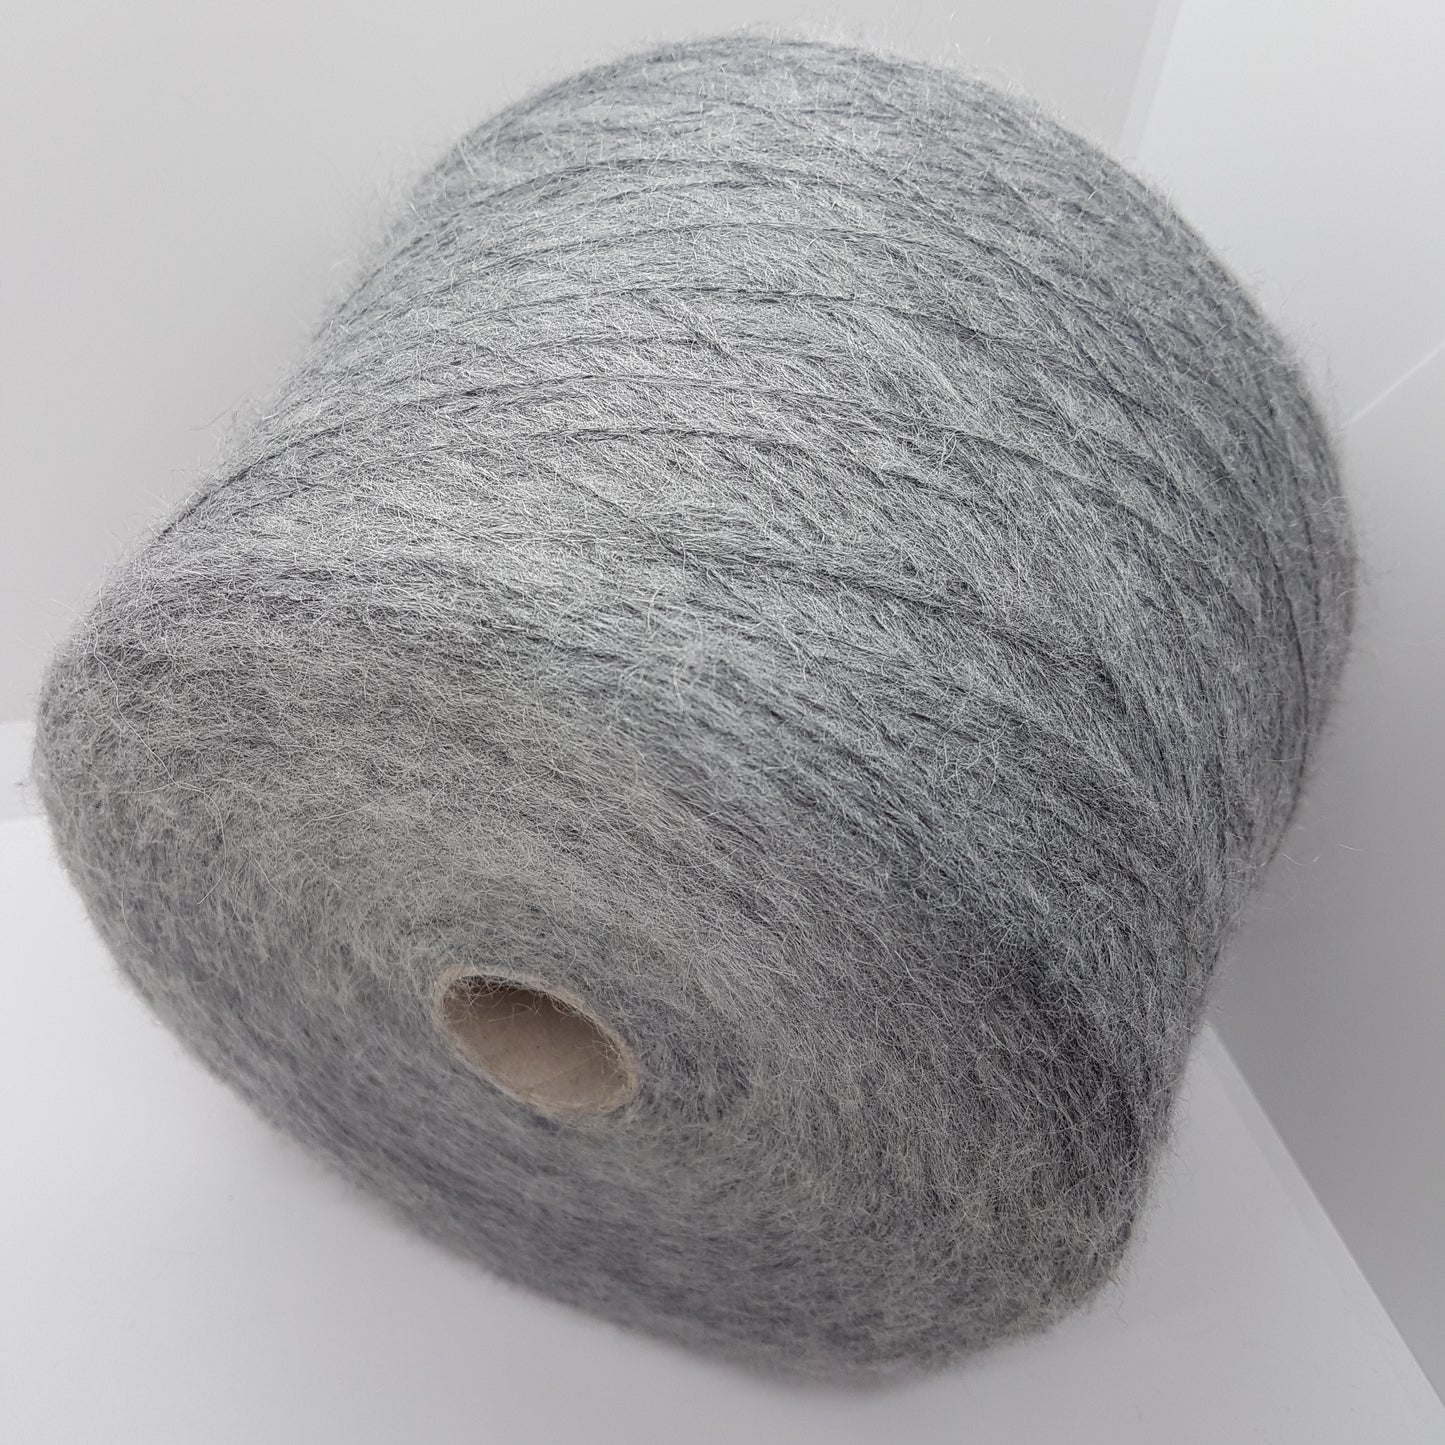 100g Mohair hilo italiano suave color Gris N.181